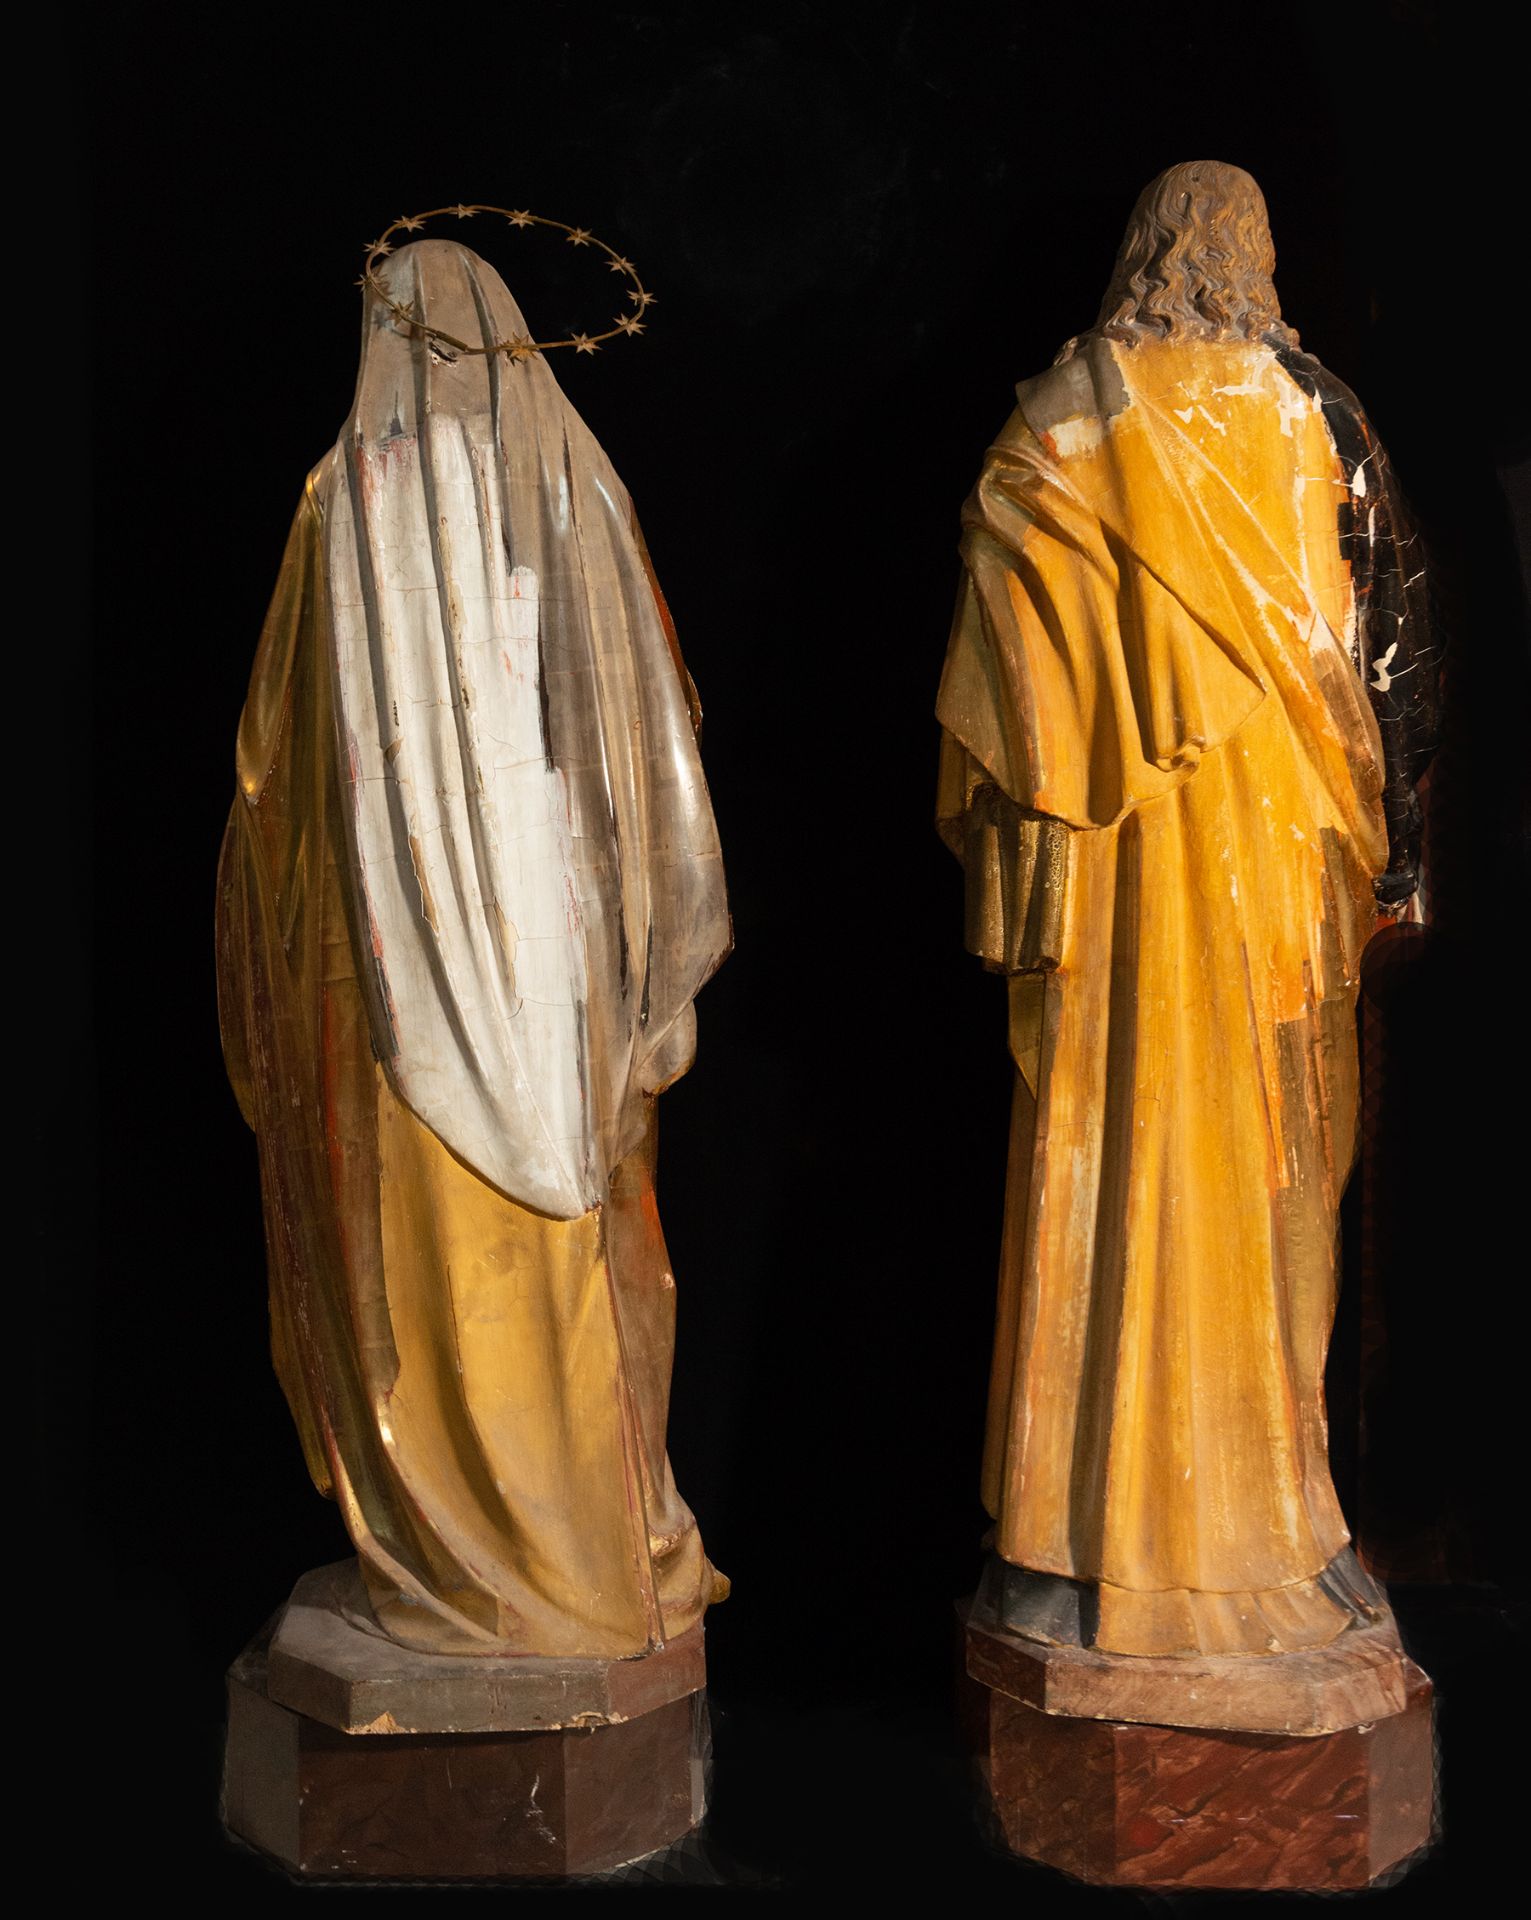 Pair of large life-size wood carvings of the Sacred Hearts of Jesus and Mary, 19th century - Image 3 of 3